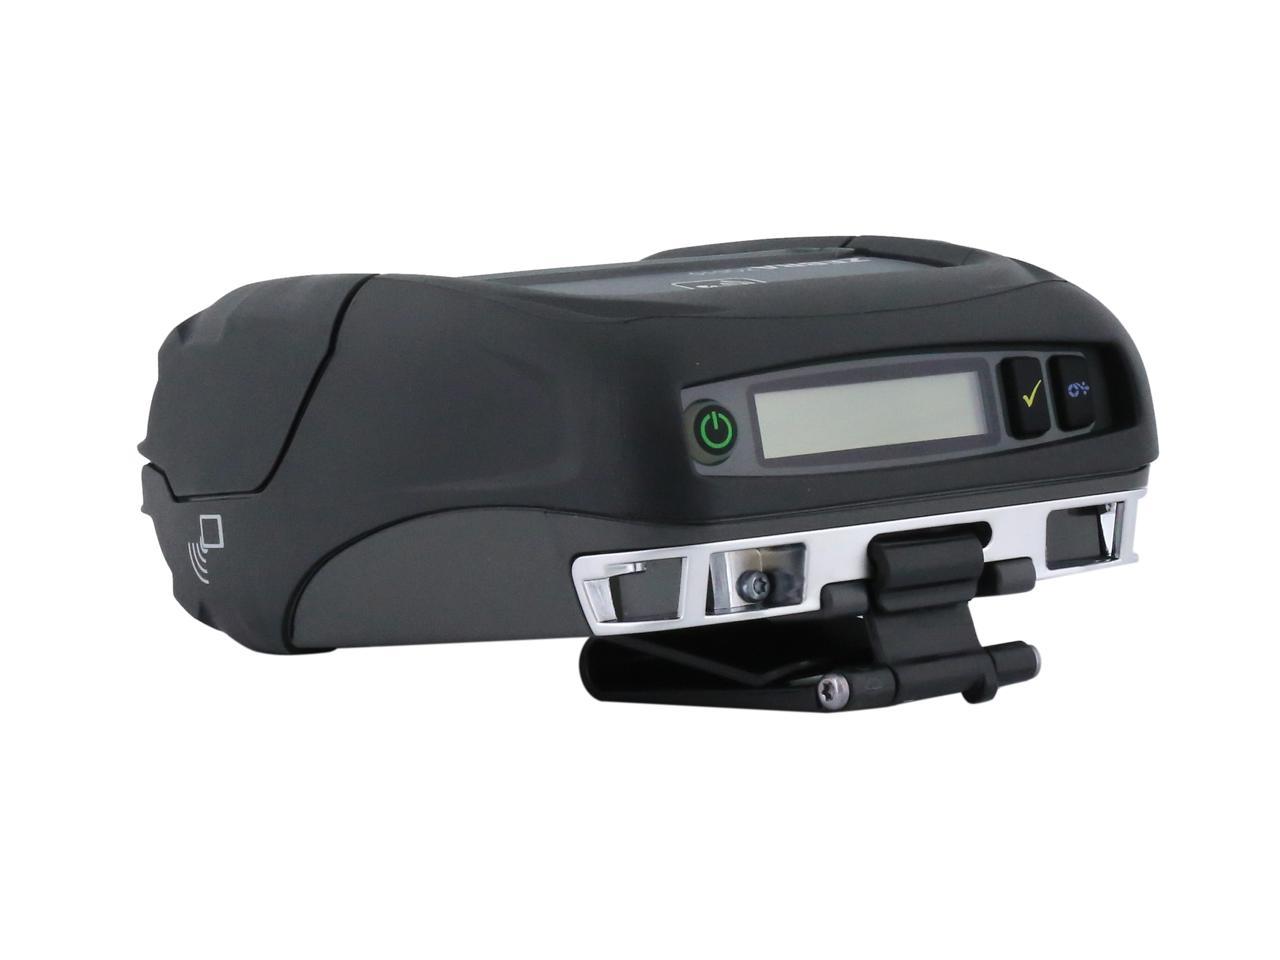 Zebra Zq510 3 Mobile Direct Thermal Receipt And Label Printer 203 Dpi Bluetooth 40 Linered 7801